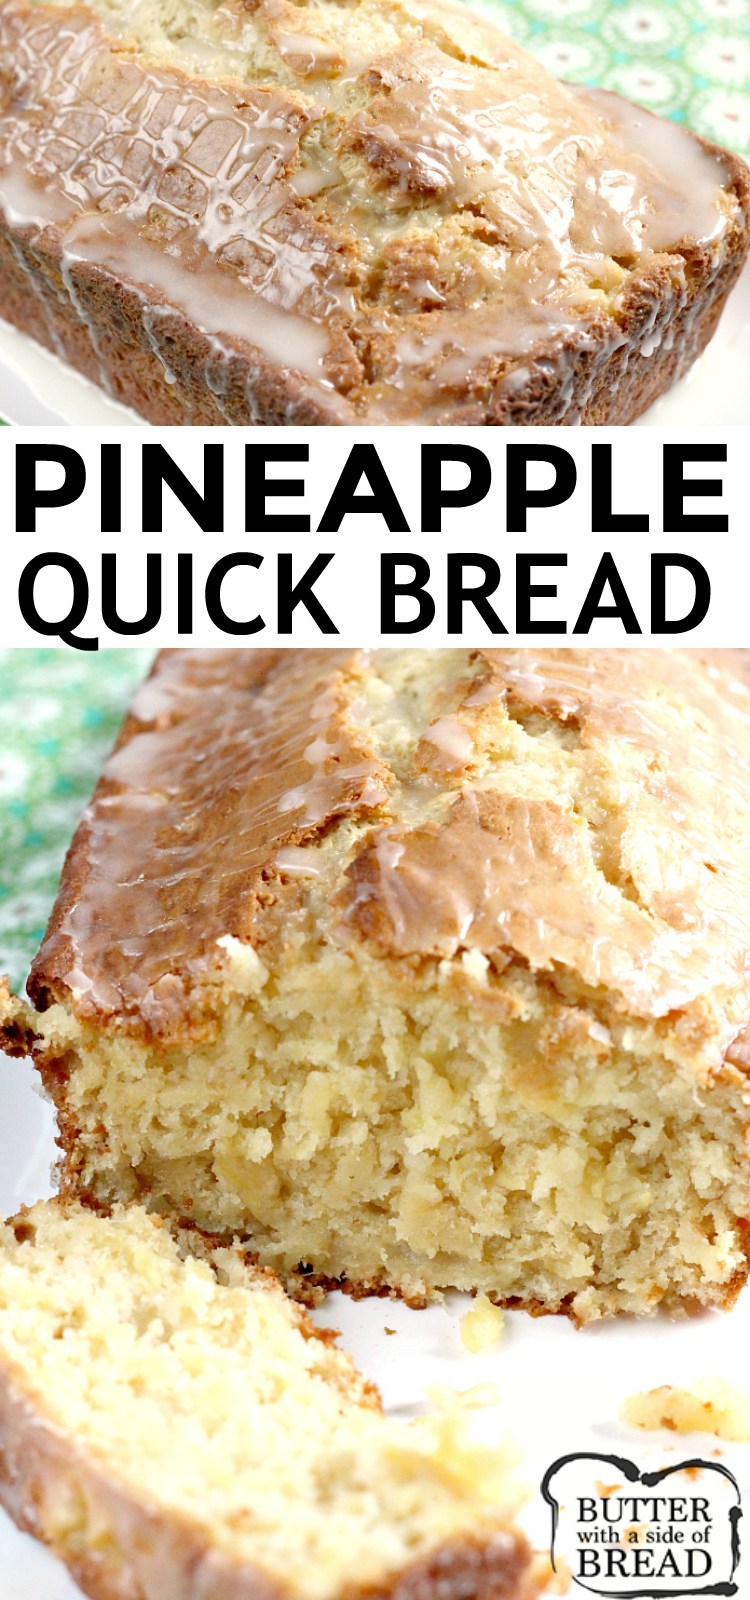 Pineapple Quick Bread is sweet, moist and absolutely delicious, especially with a simple pineapple glaze on top! This quick bread is made with crushed pineapple, cream cheese, sour cream and a few other basic ingredients.